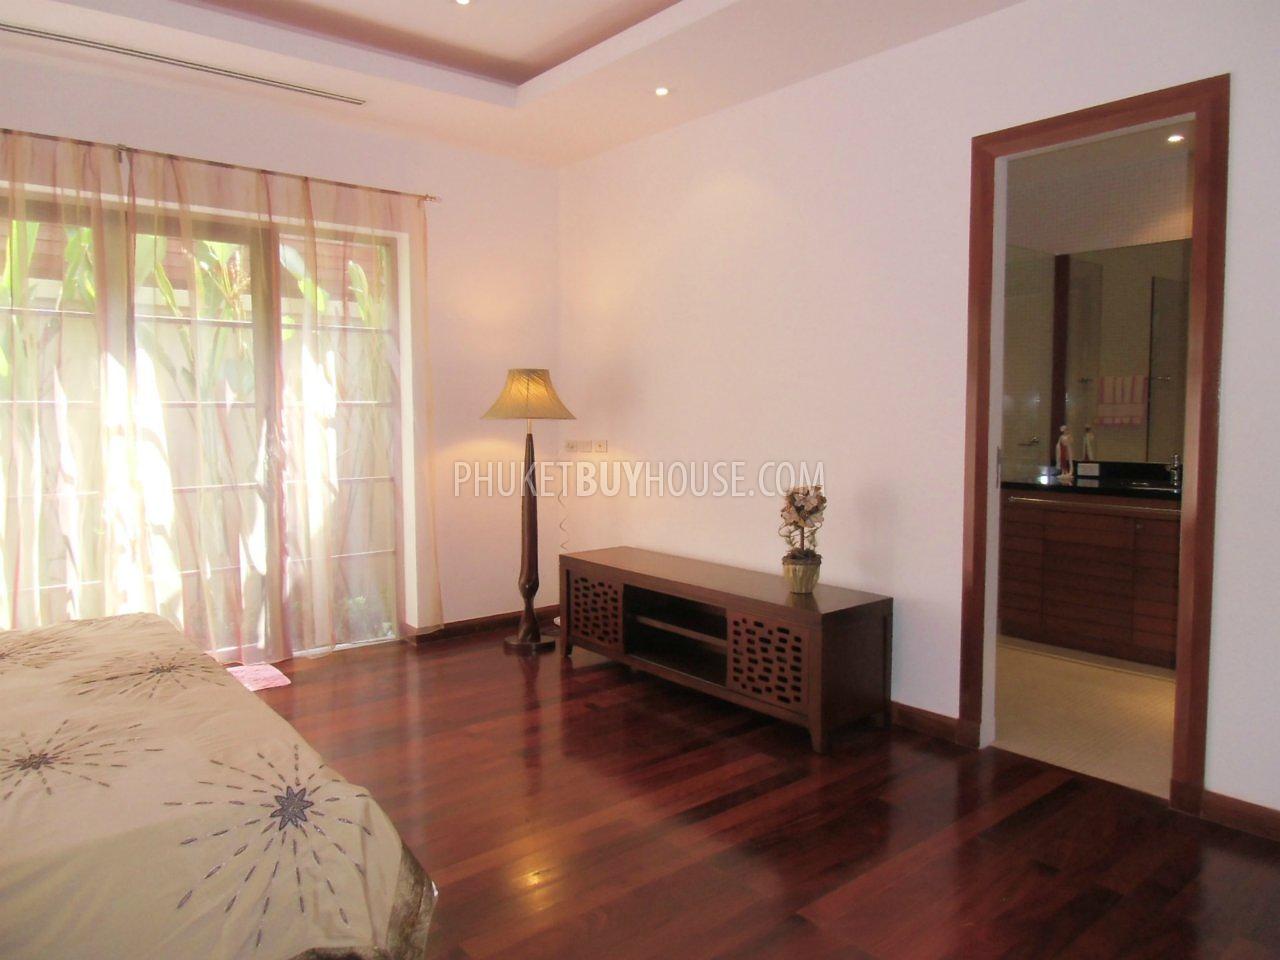 BAN2907: Lovely Villa with 3 Bedroom in walking distance from the Bang Tao beach. Фото #3